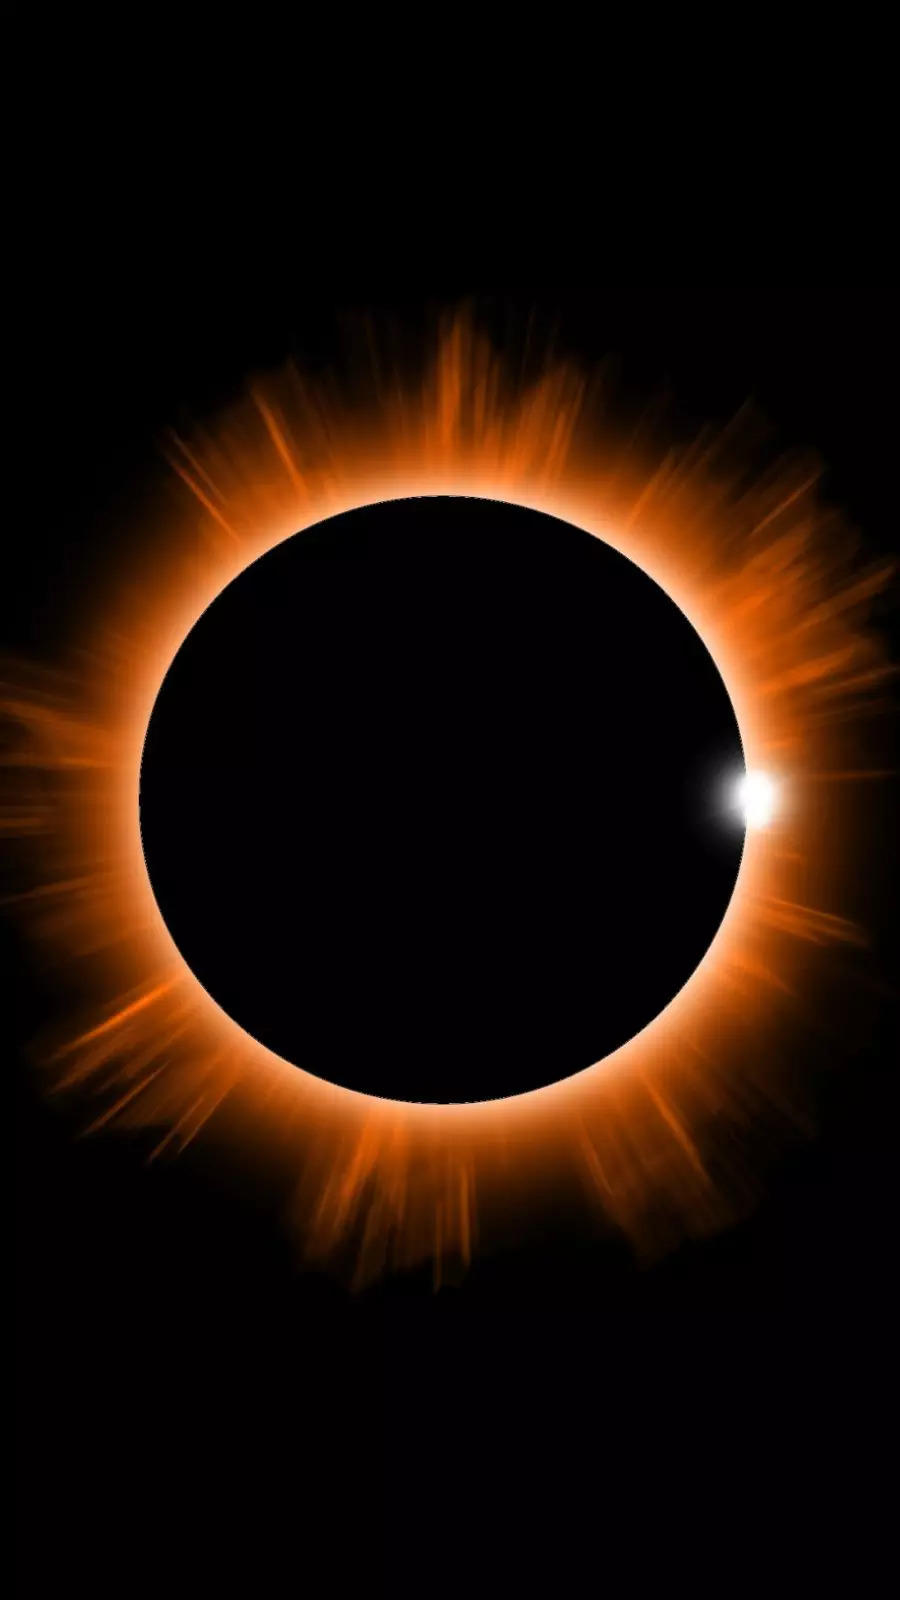 Pen in Hand: Not a ring of fire, but still an interesting eclipse |  Lifestyle | tehachapinews.com